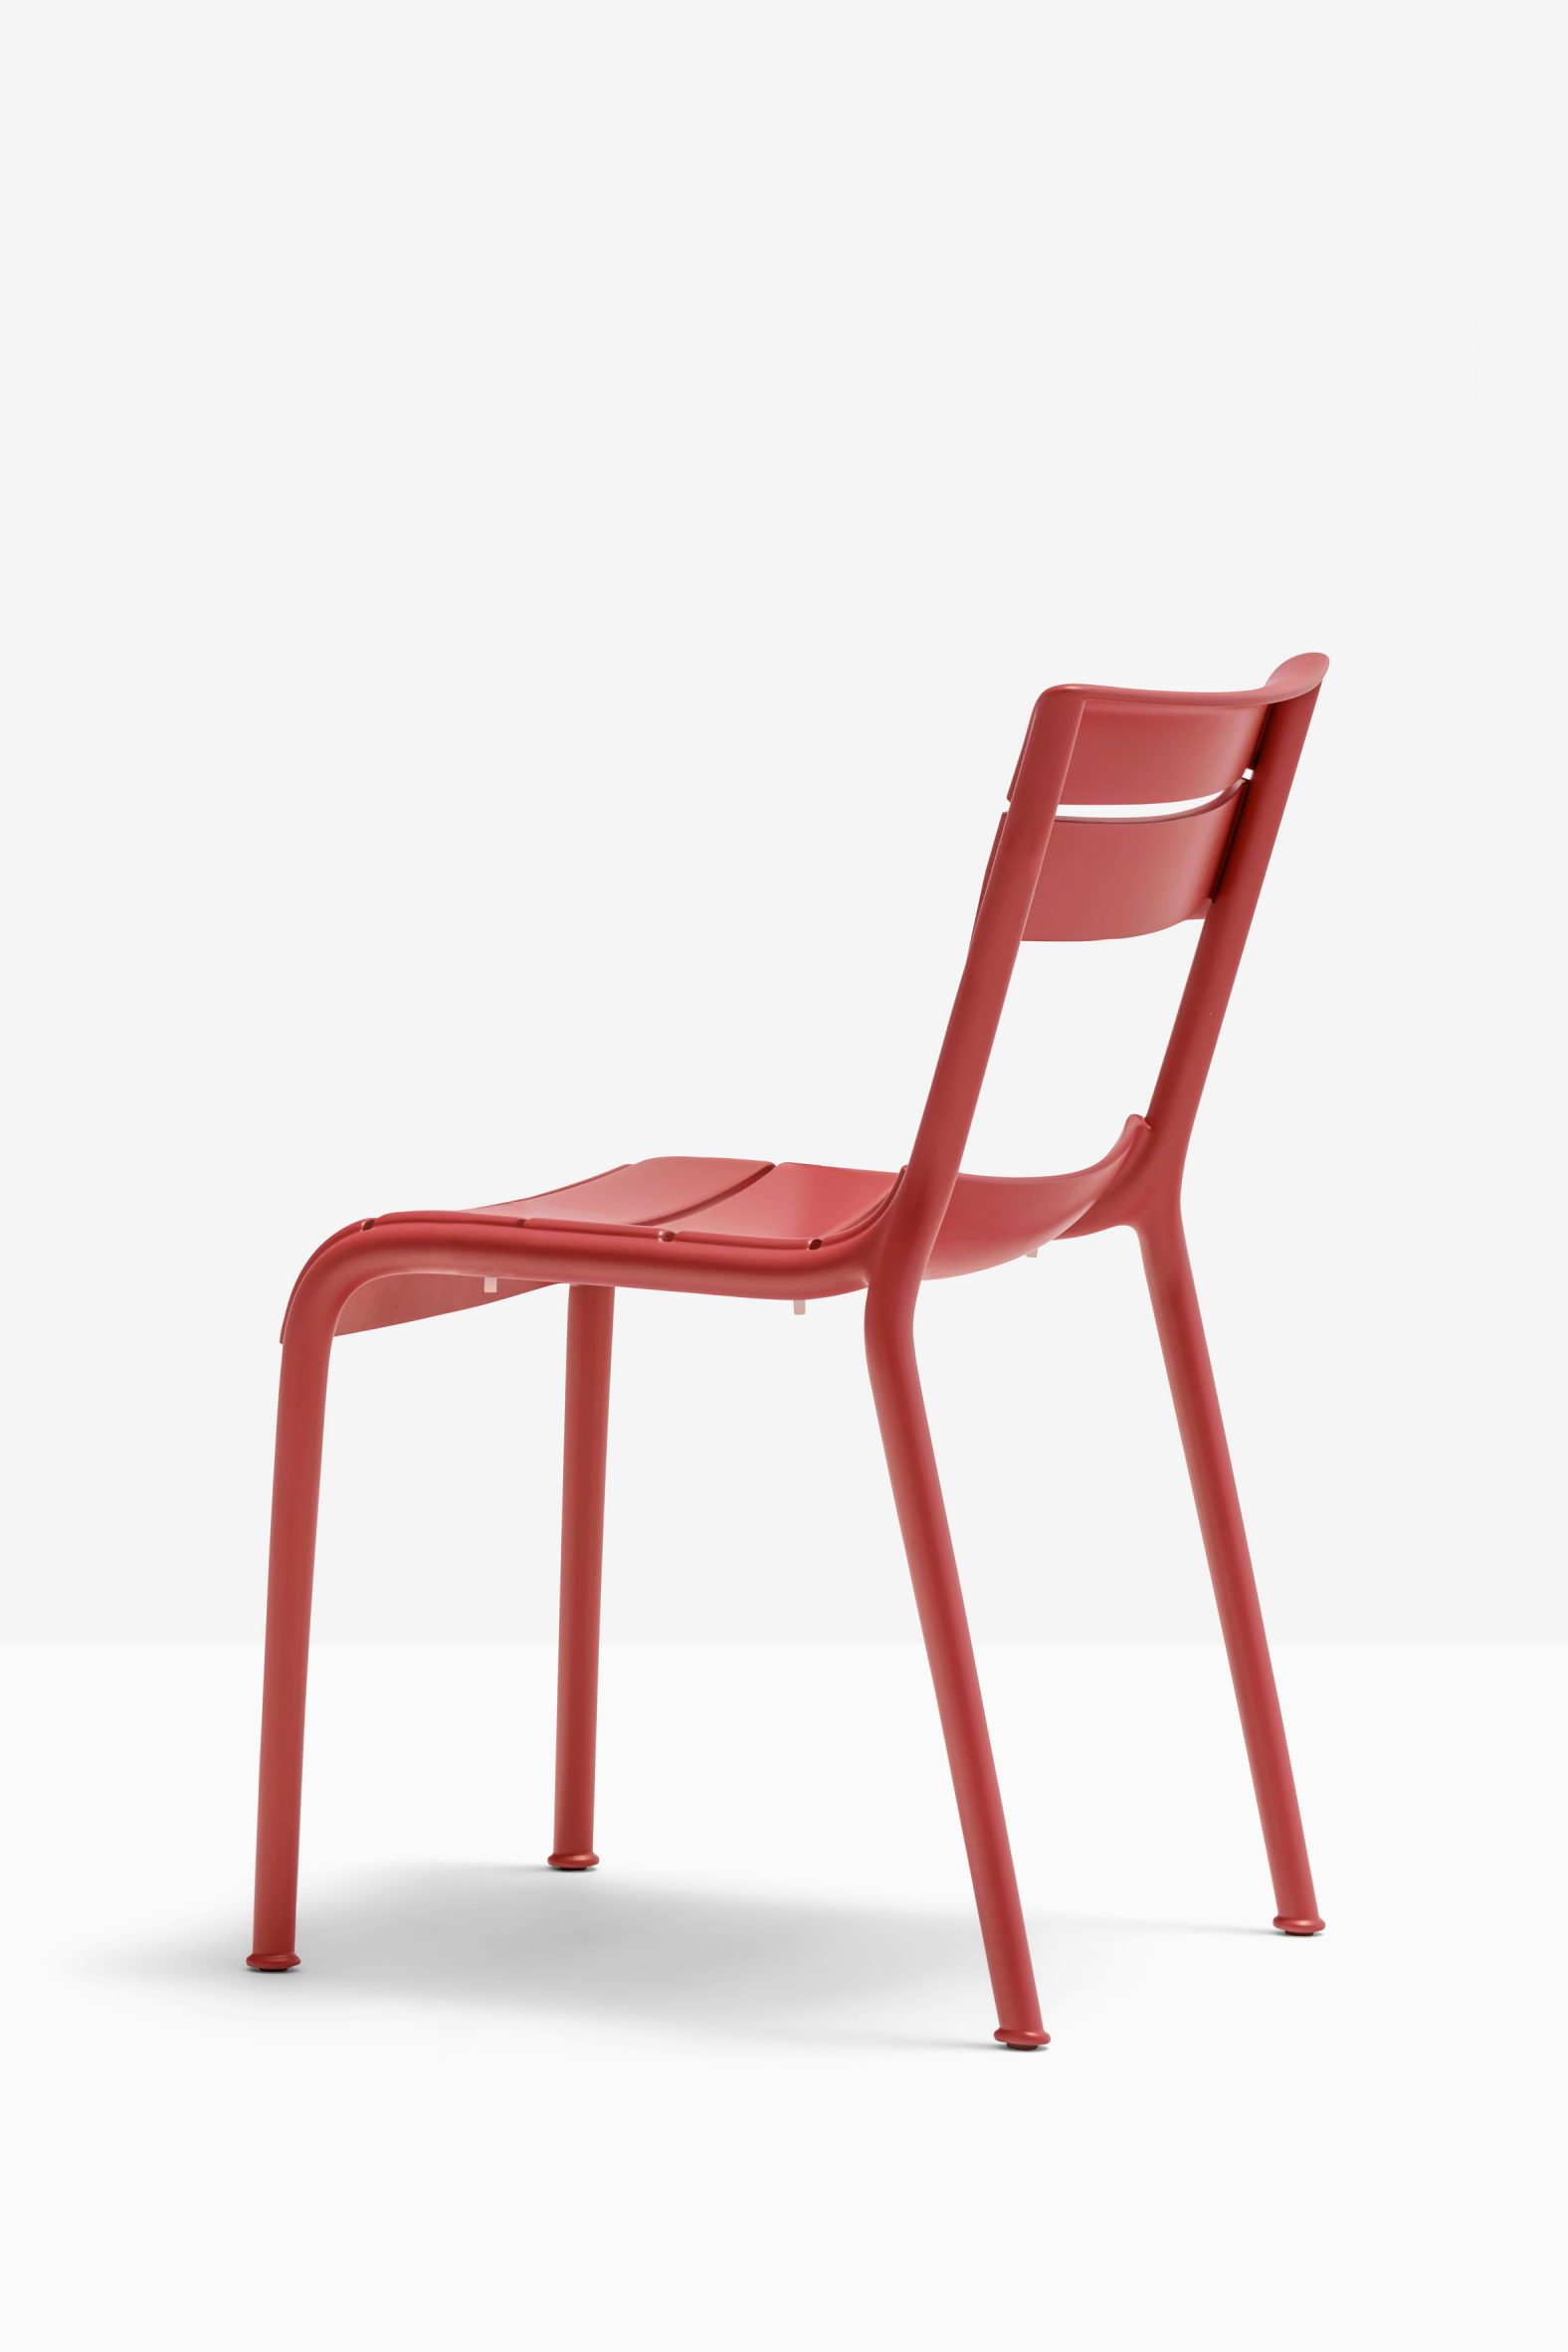 Souvenir chair in red, rear view on white background